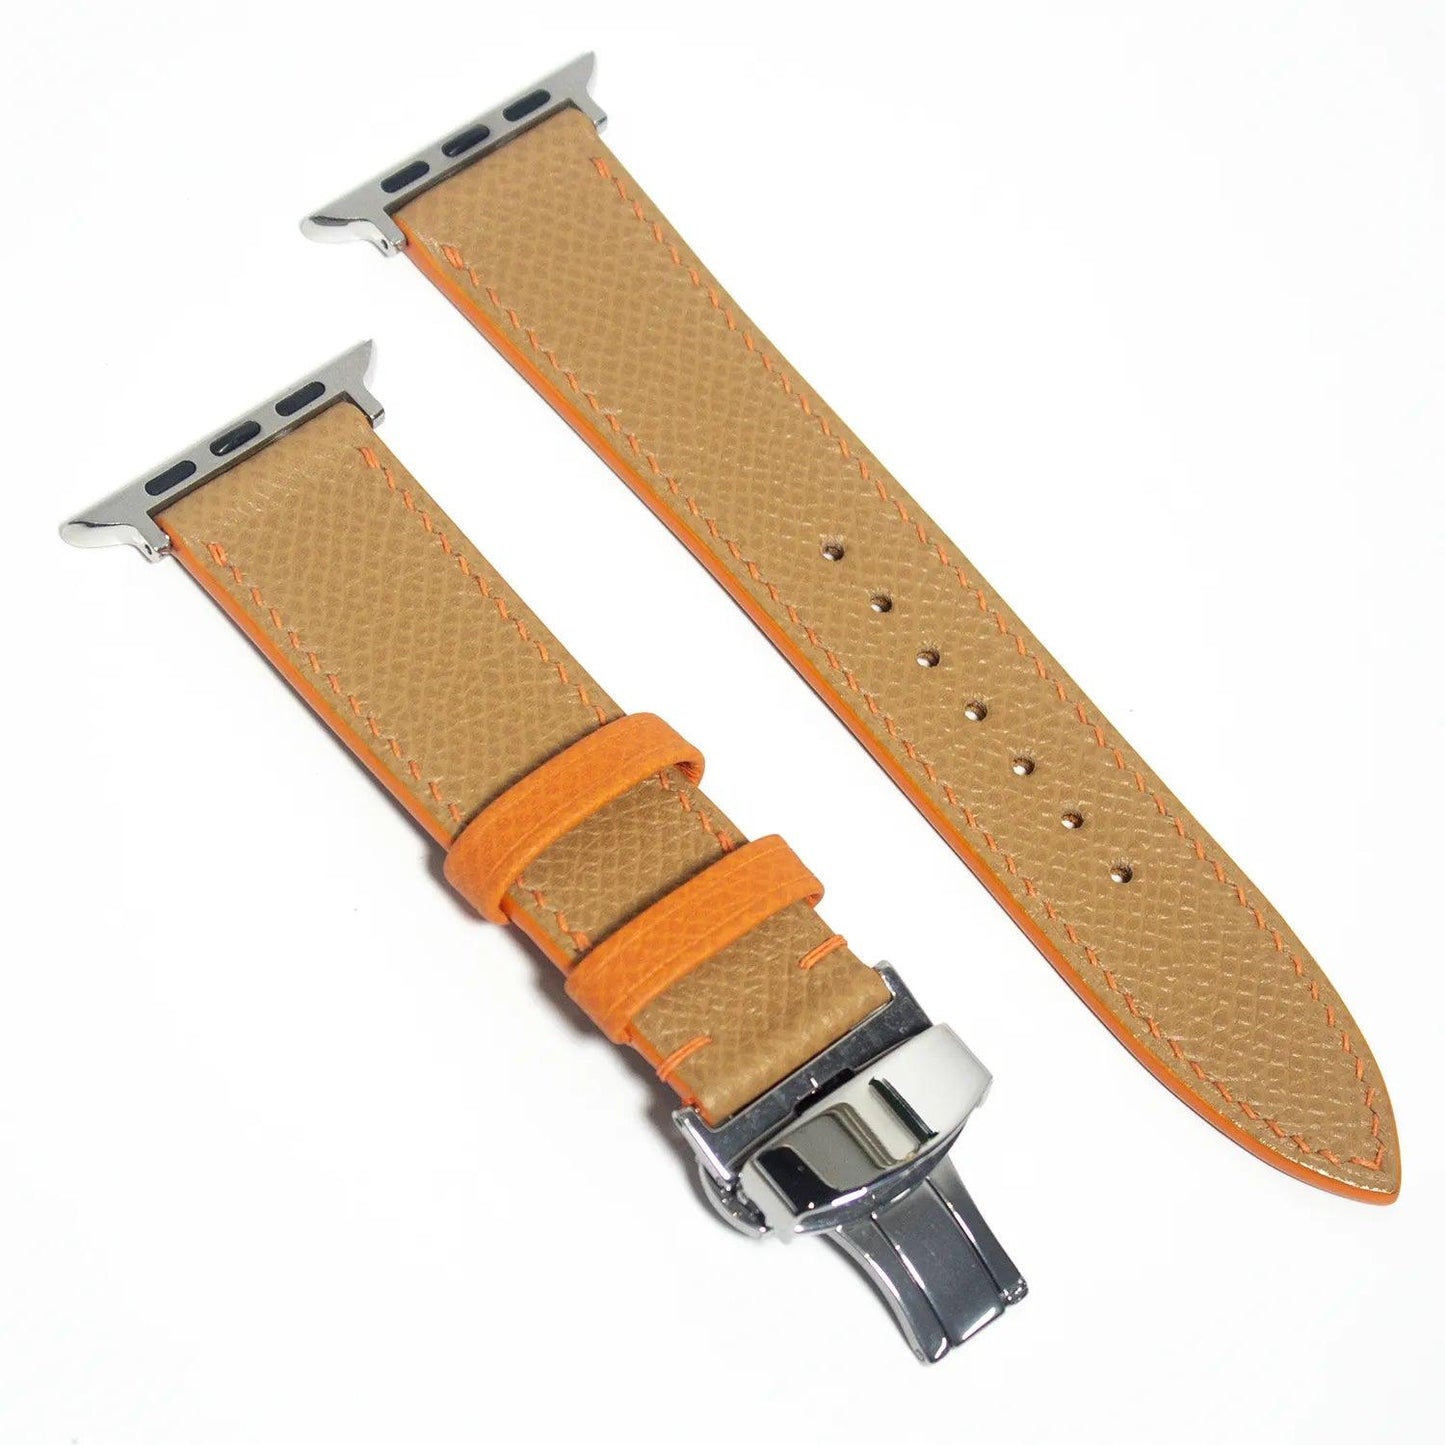 Refined leather Apple Watch band in beige Epsom leather, ideal for those seeking a sophisticated and neutral accessory.